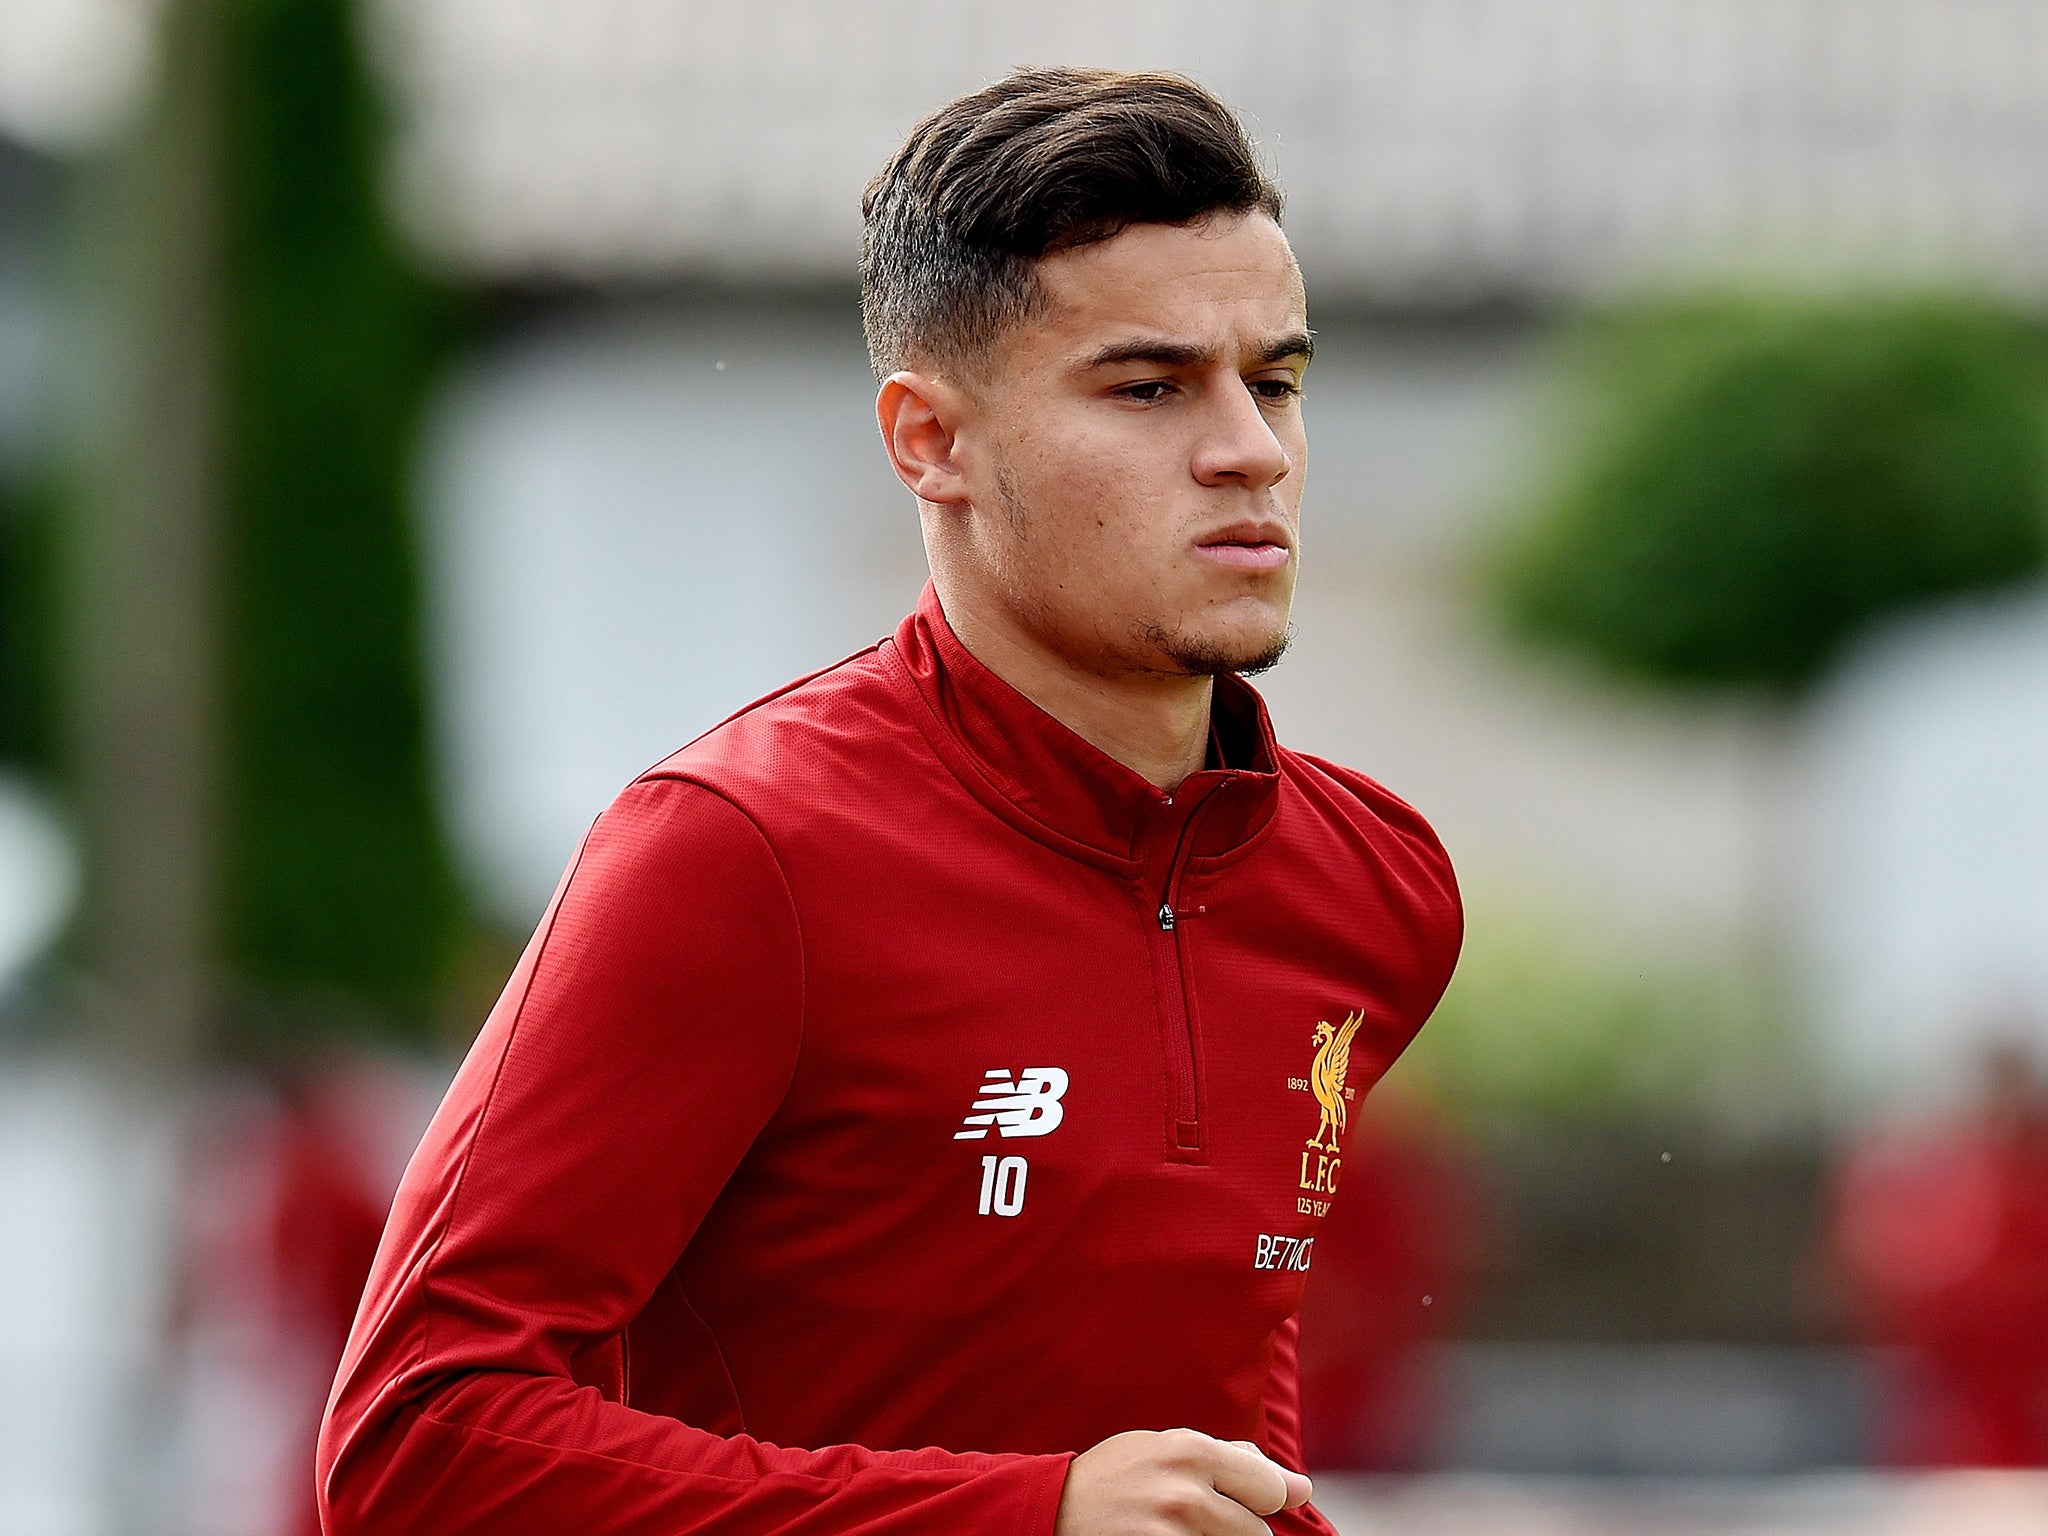 Philippe Coutinho has been persistently linked with a move to Barcelona